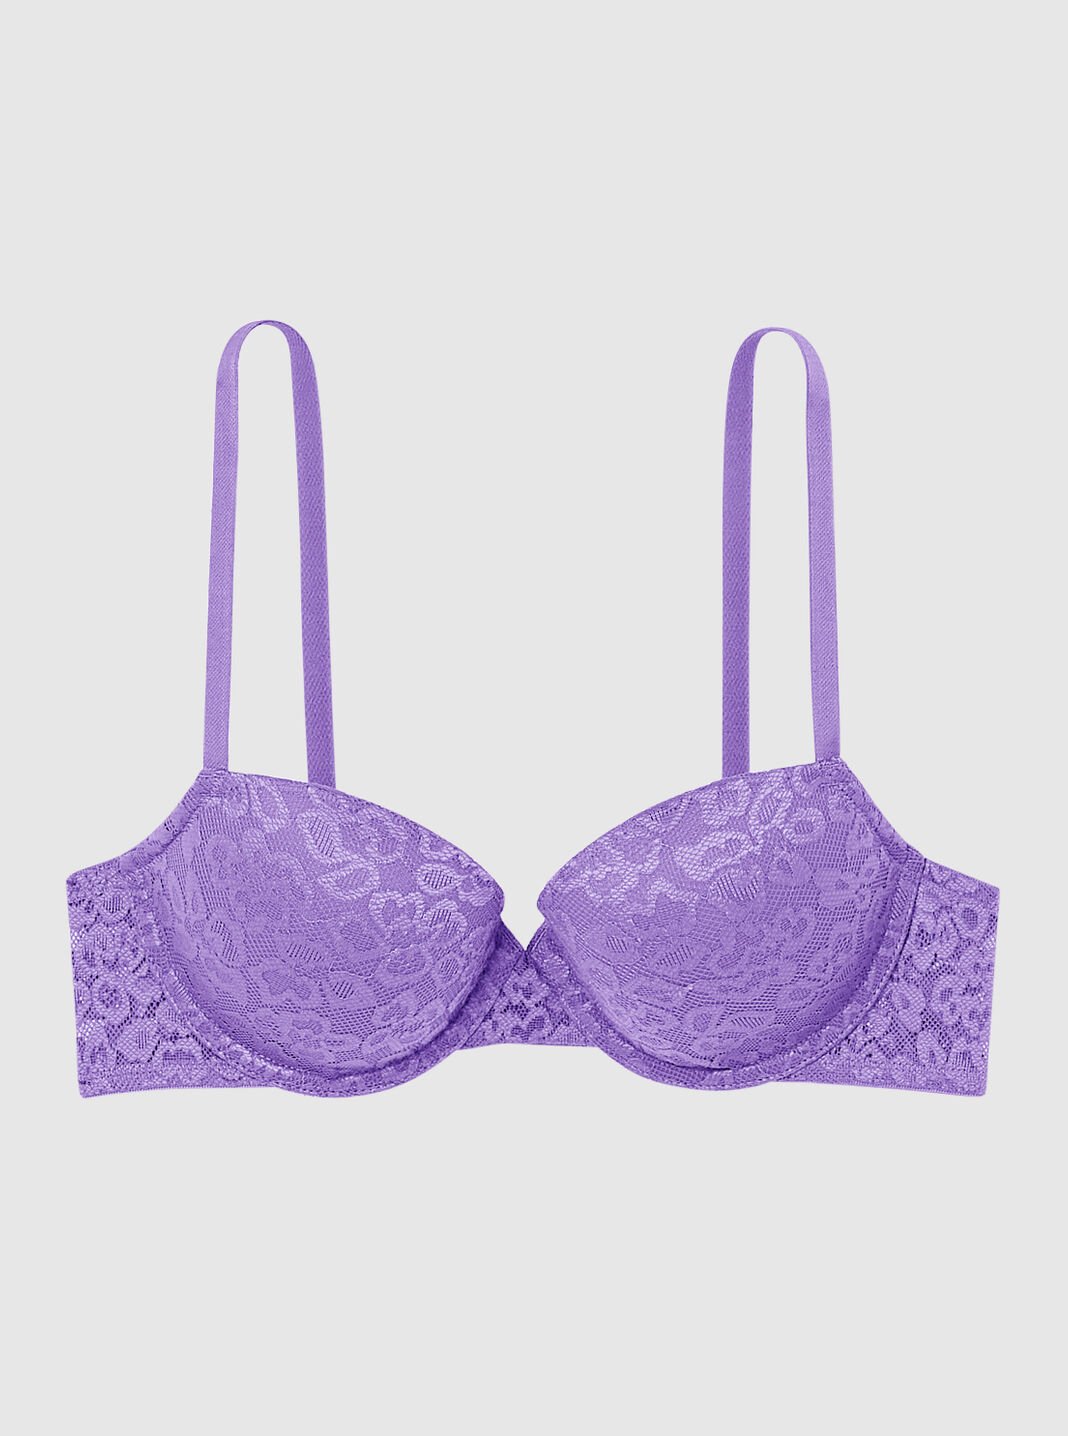 demys_boudoir - Bra size 36/80C available at 300Ksh. #clearancesale #25%off